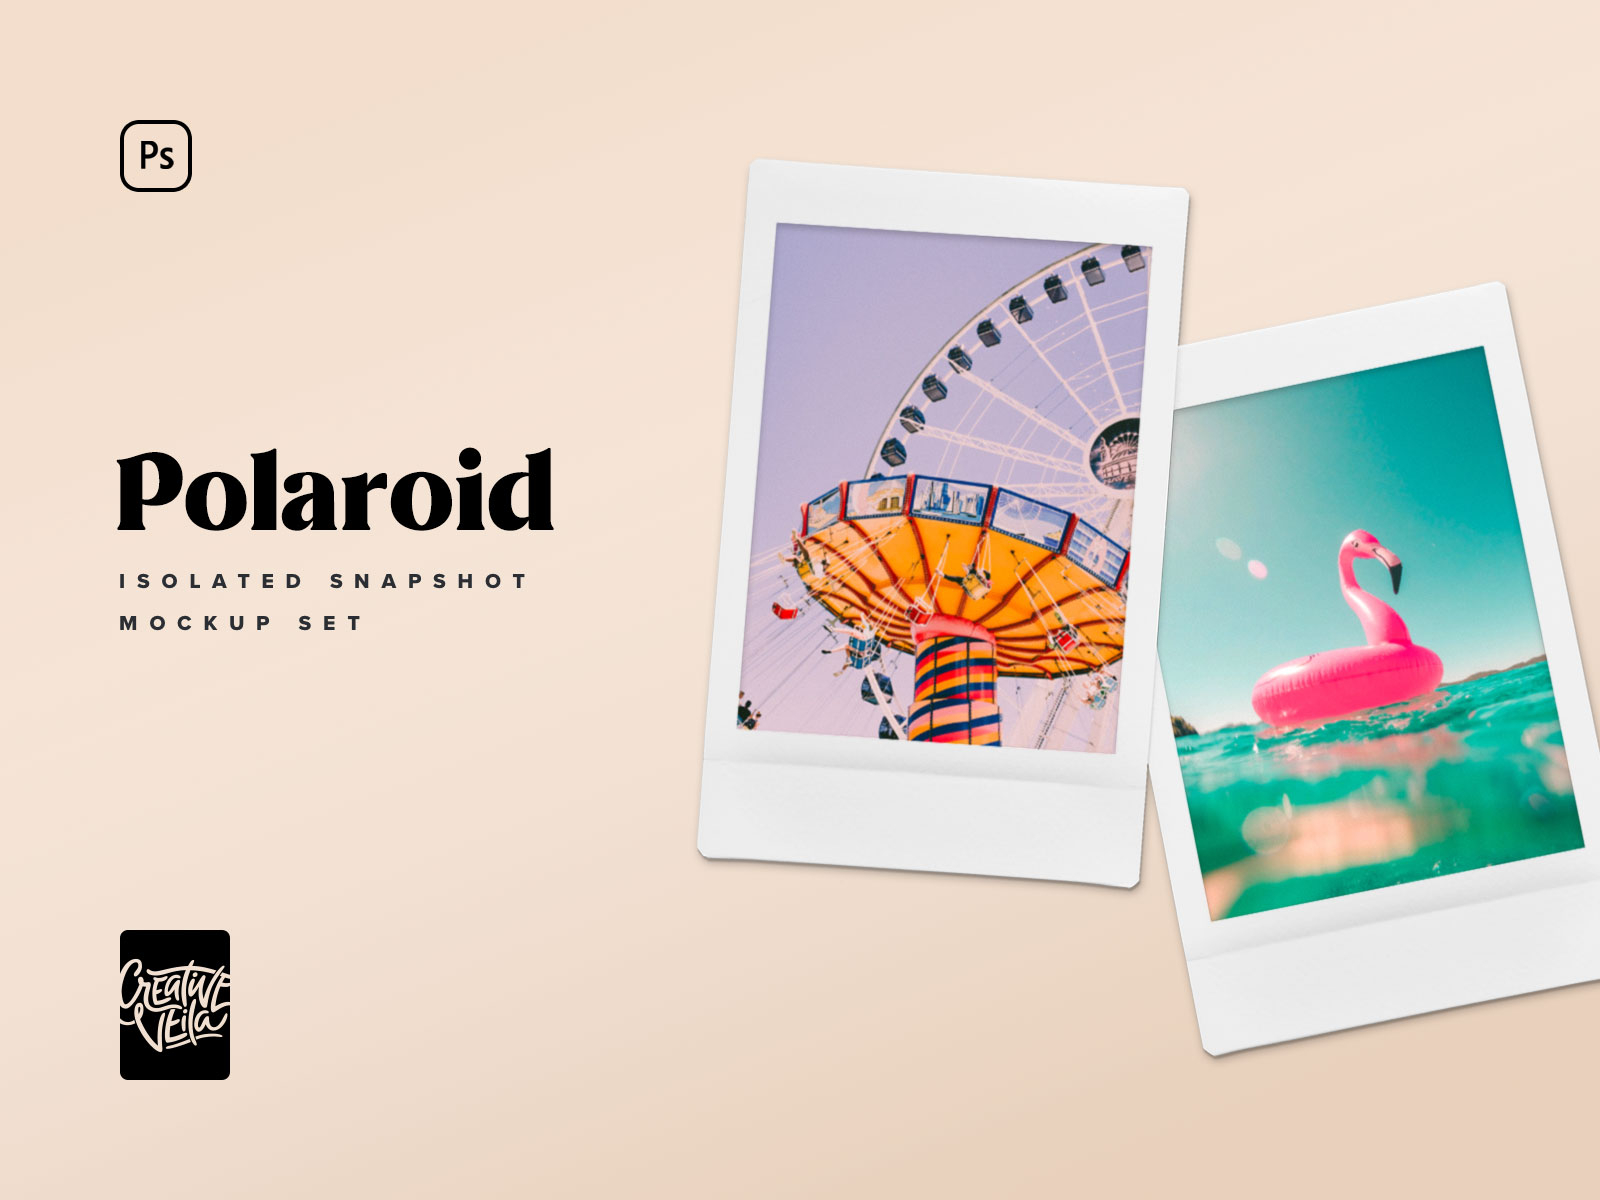 Download Polaroid Snapshot Picture Mockup Templates by ...